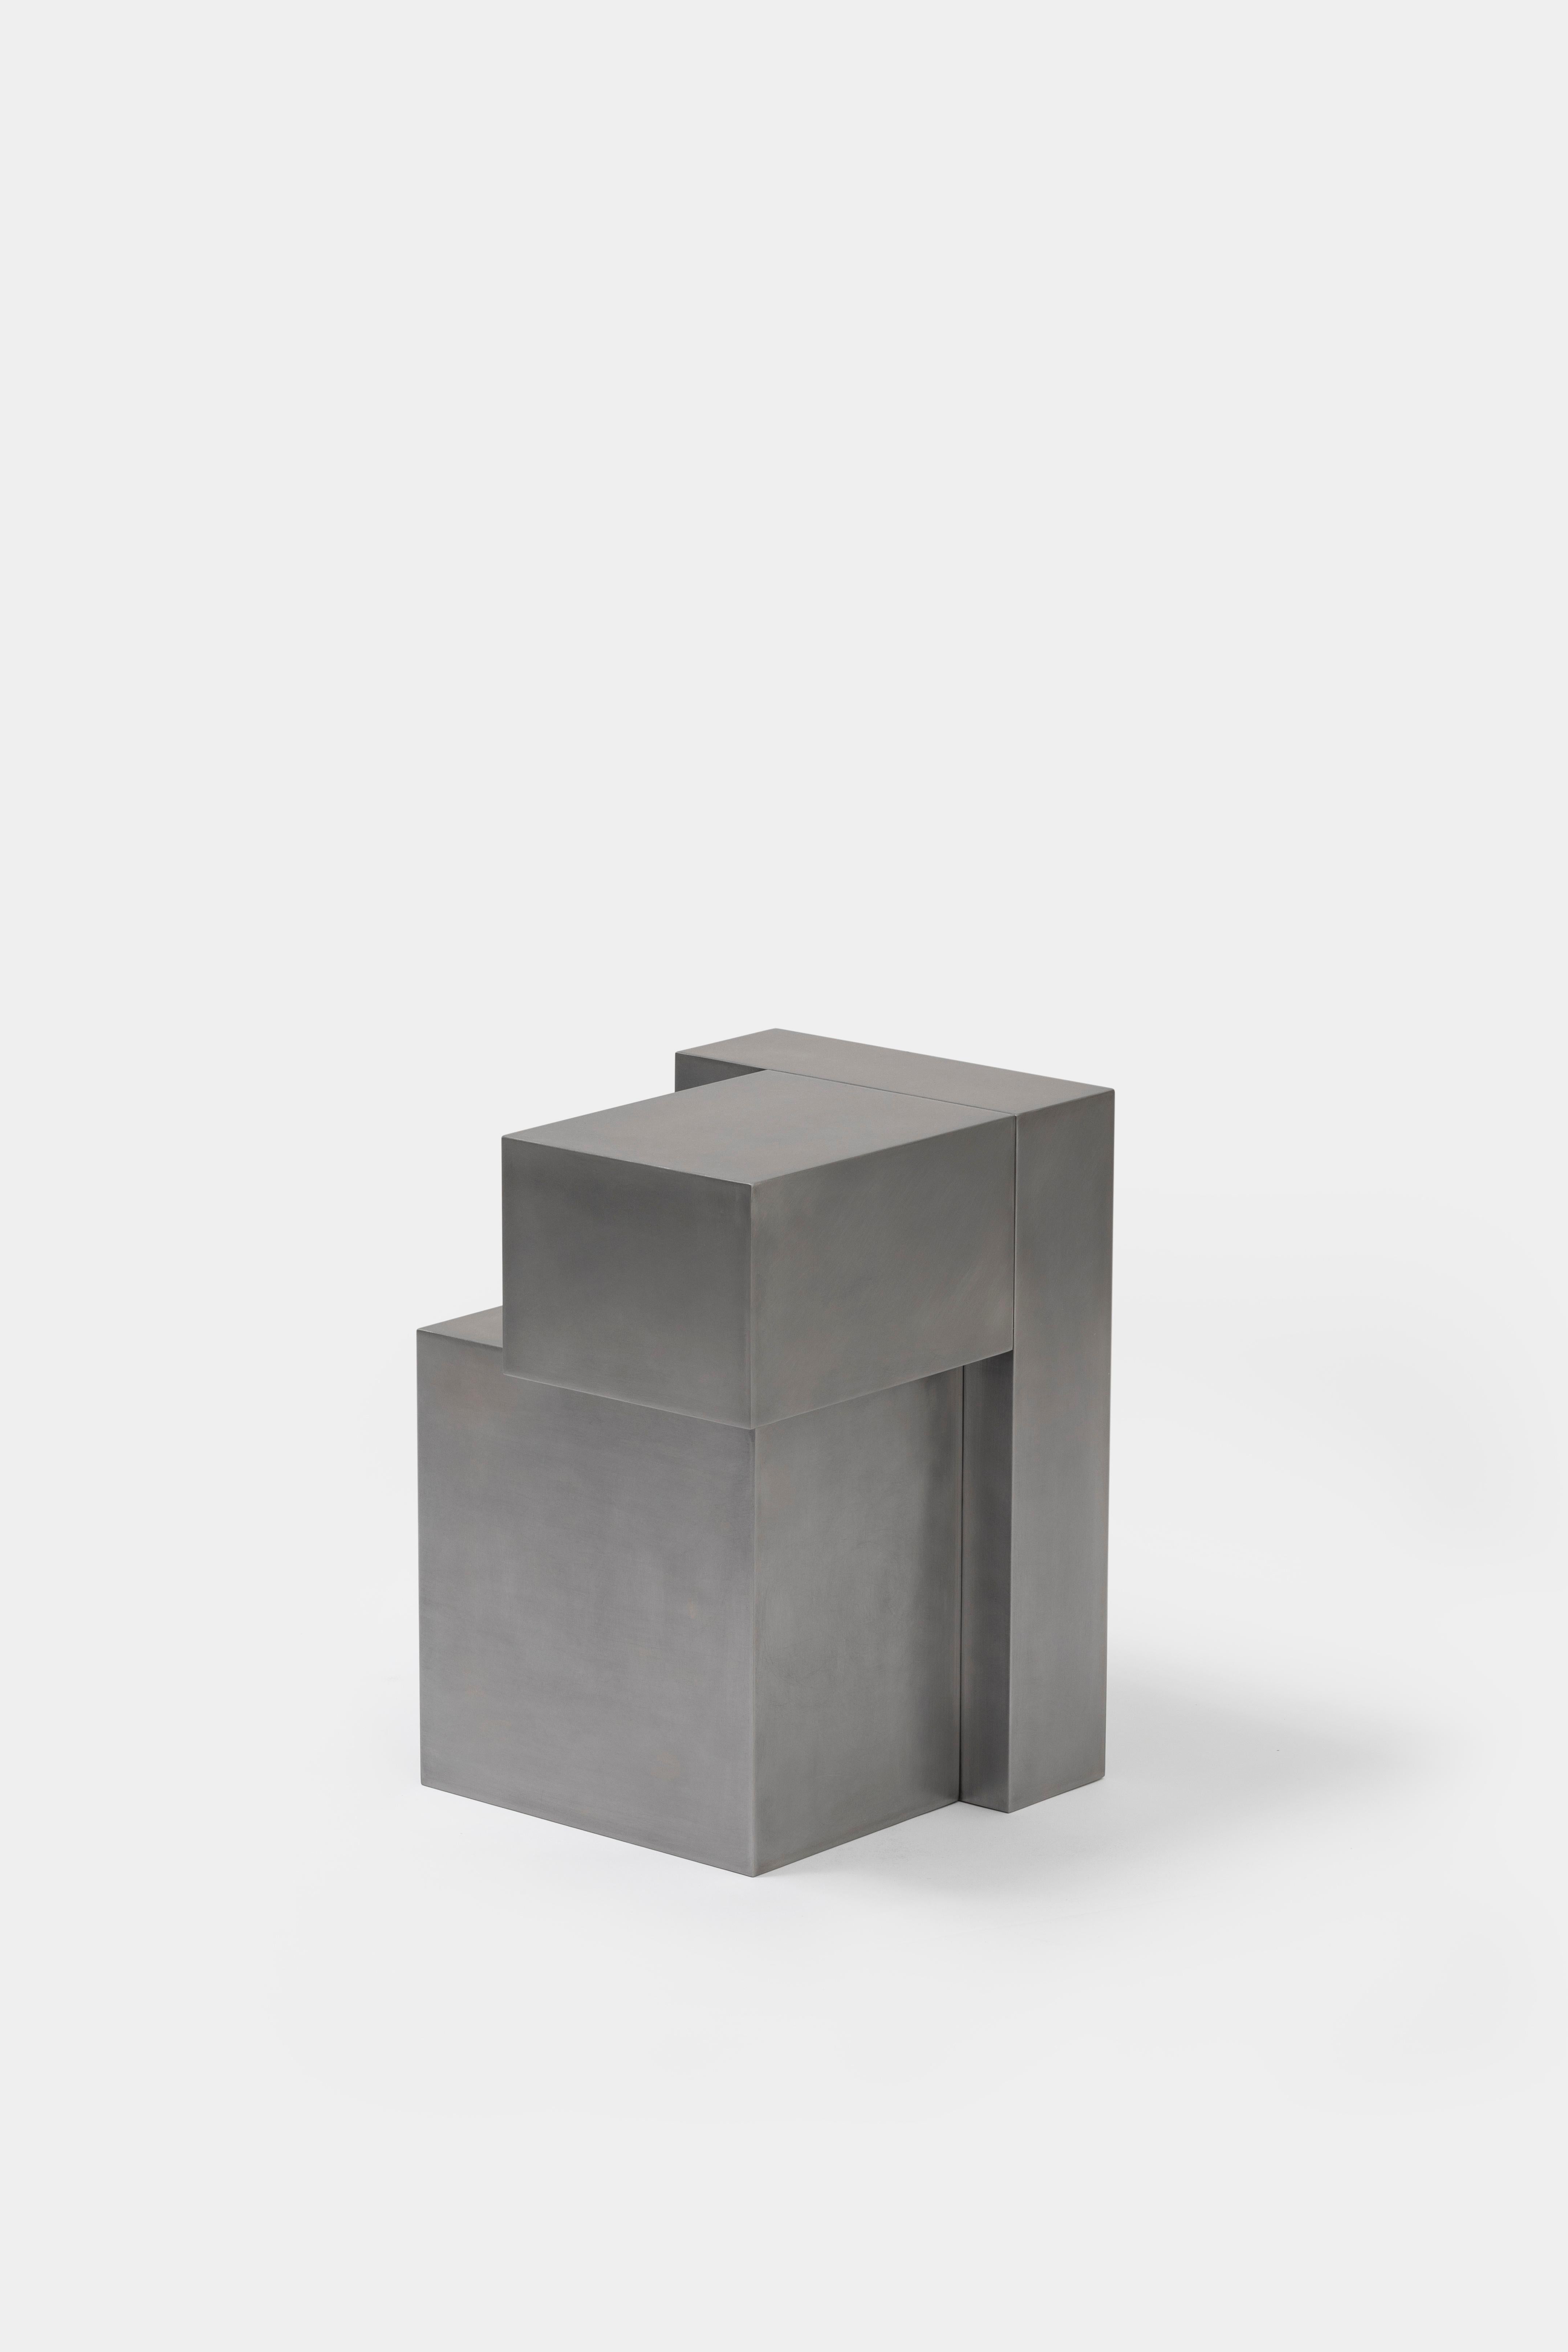 Layered steel stool by Hyungshin Hwang.
2019
Dimensions: D 30 x W 30 x H 42 cm.
Materials: stainless steel.

Layered Series is the main theme and concept of work of Hwang, who continues his experiment which is based on architectural composition